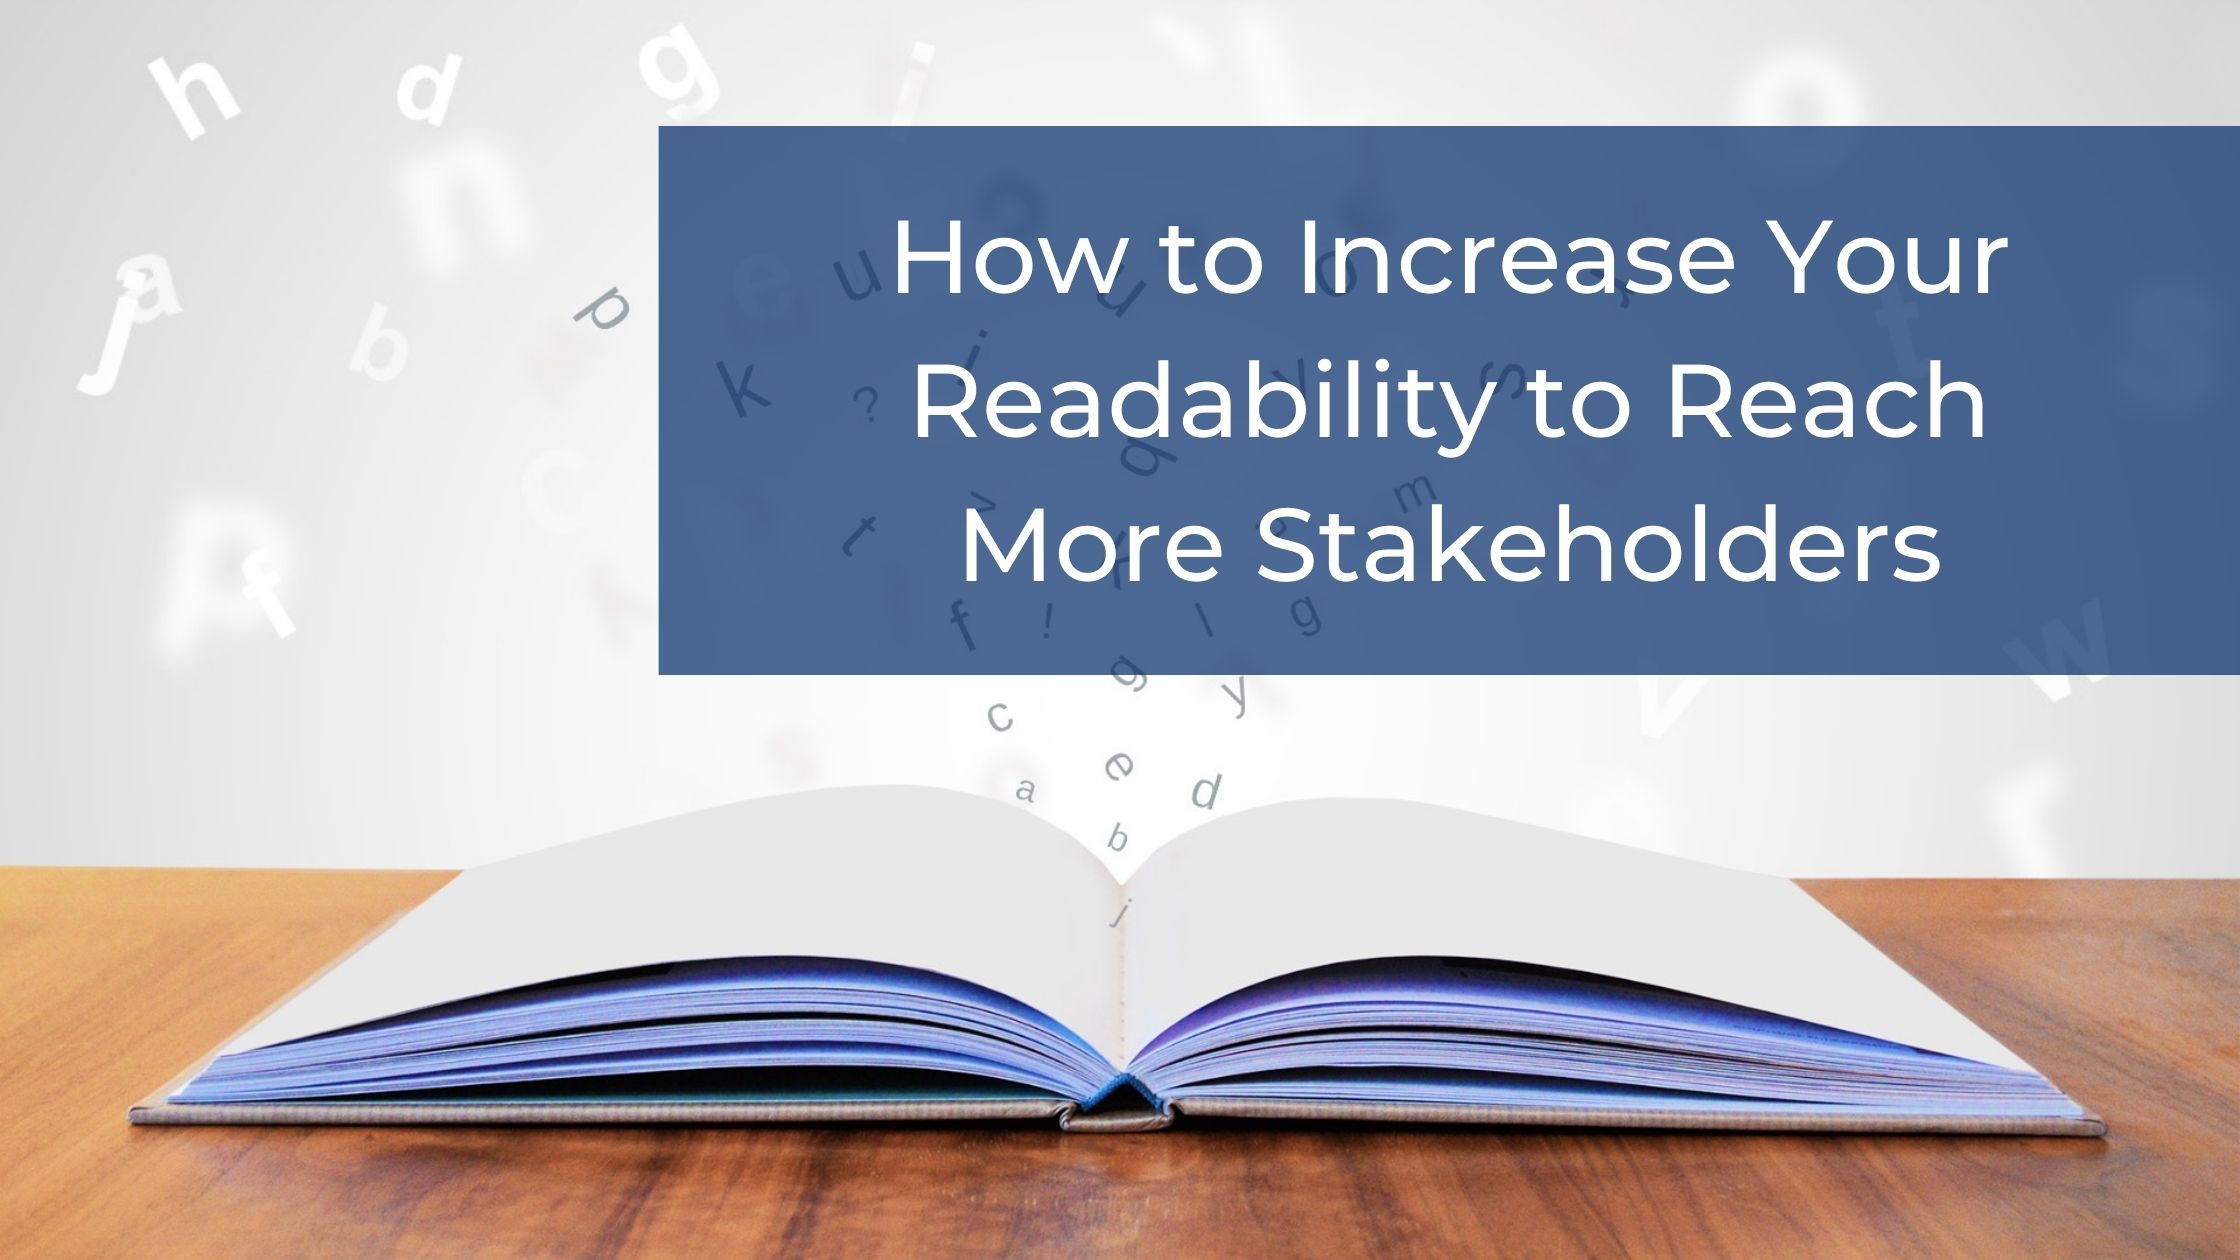 How to Increase Your Readability to Reach More Stakeholders